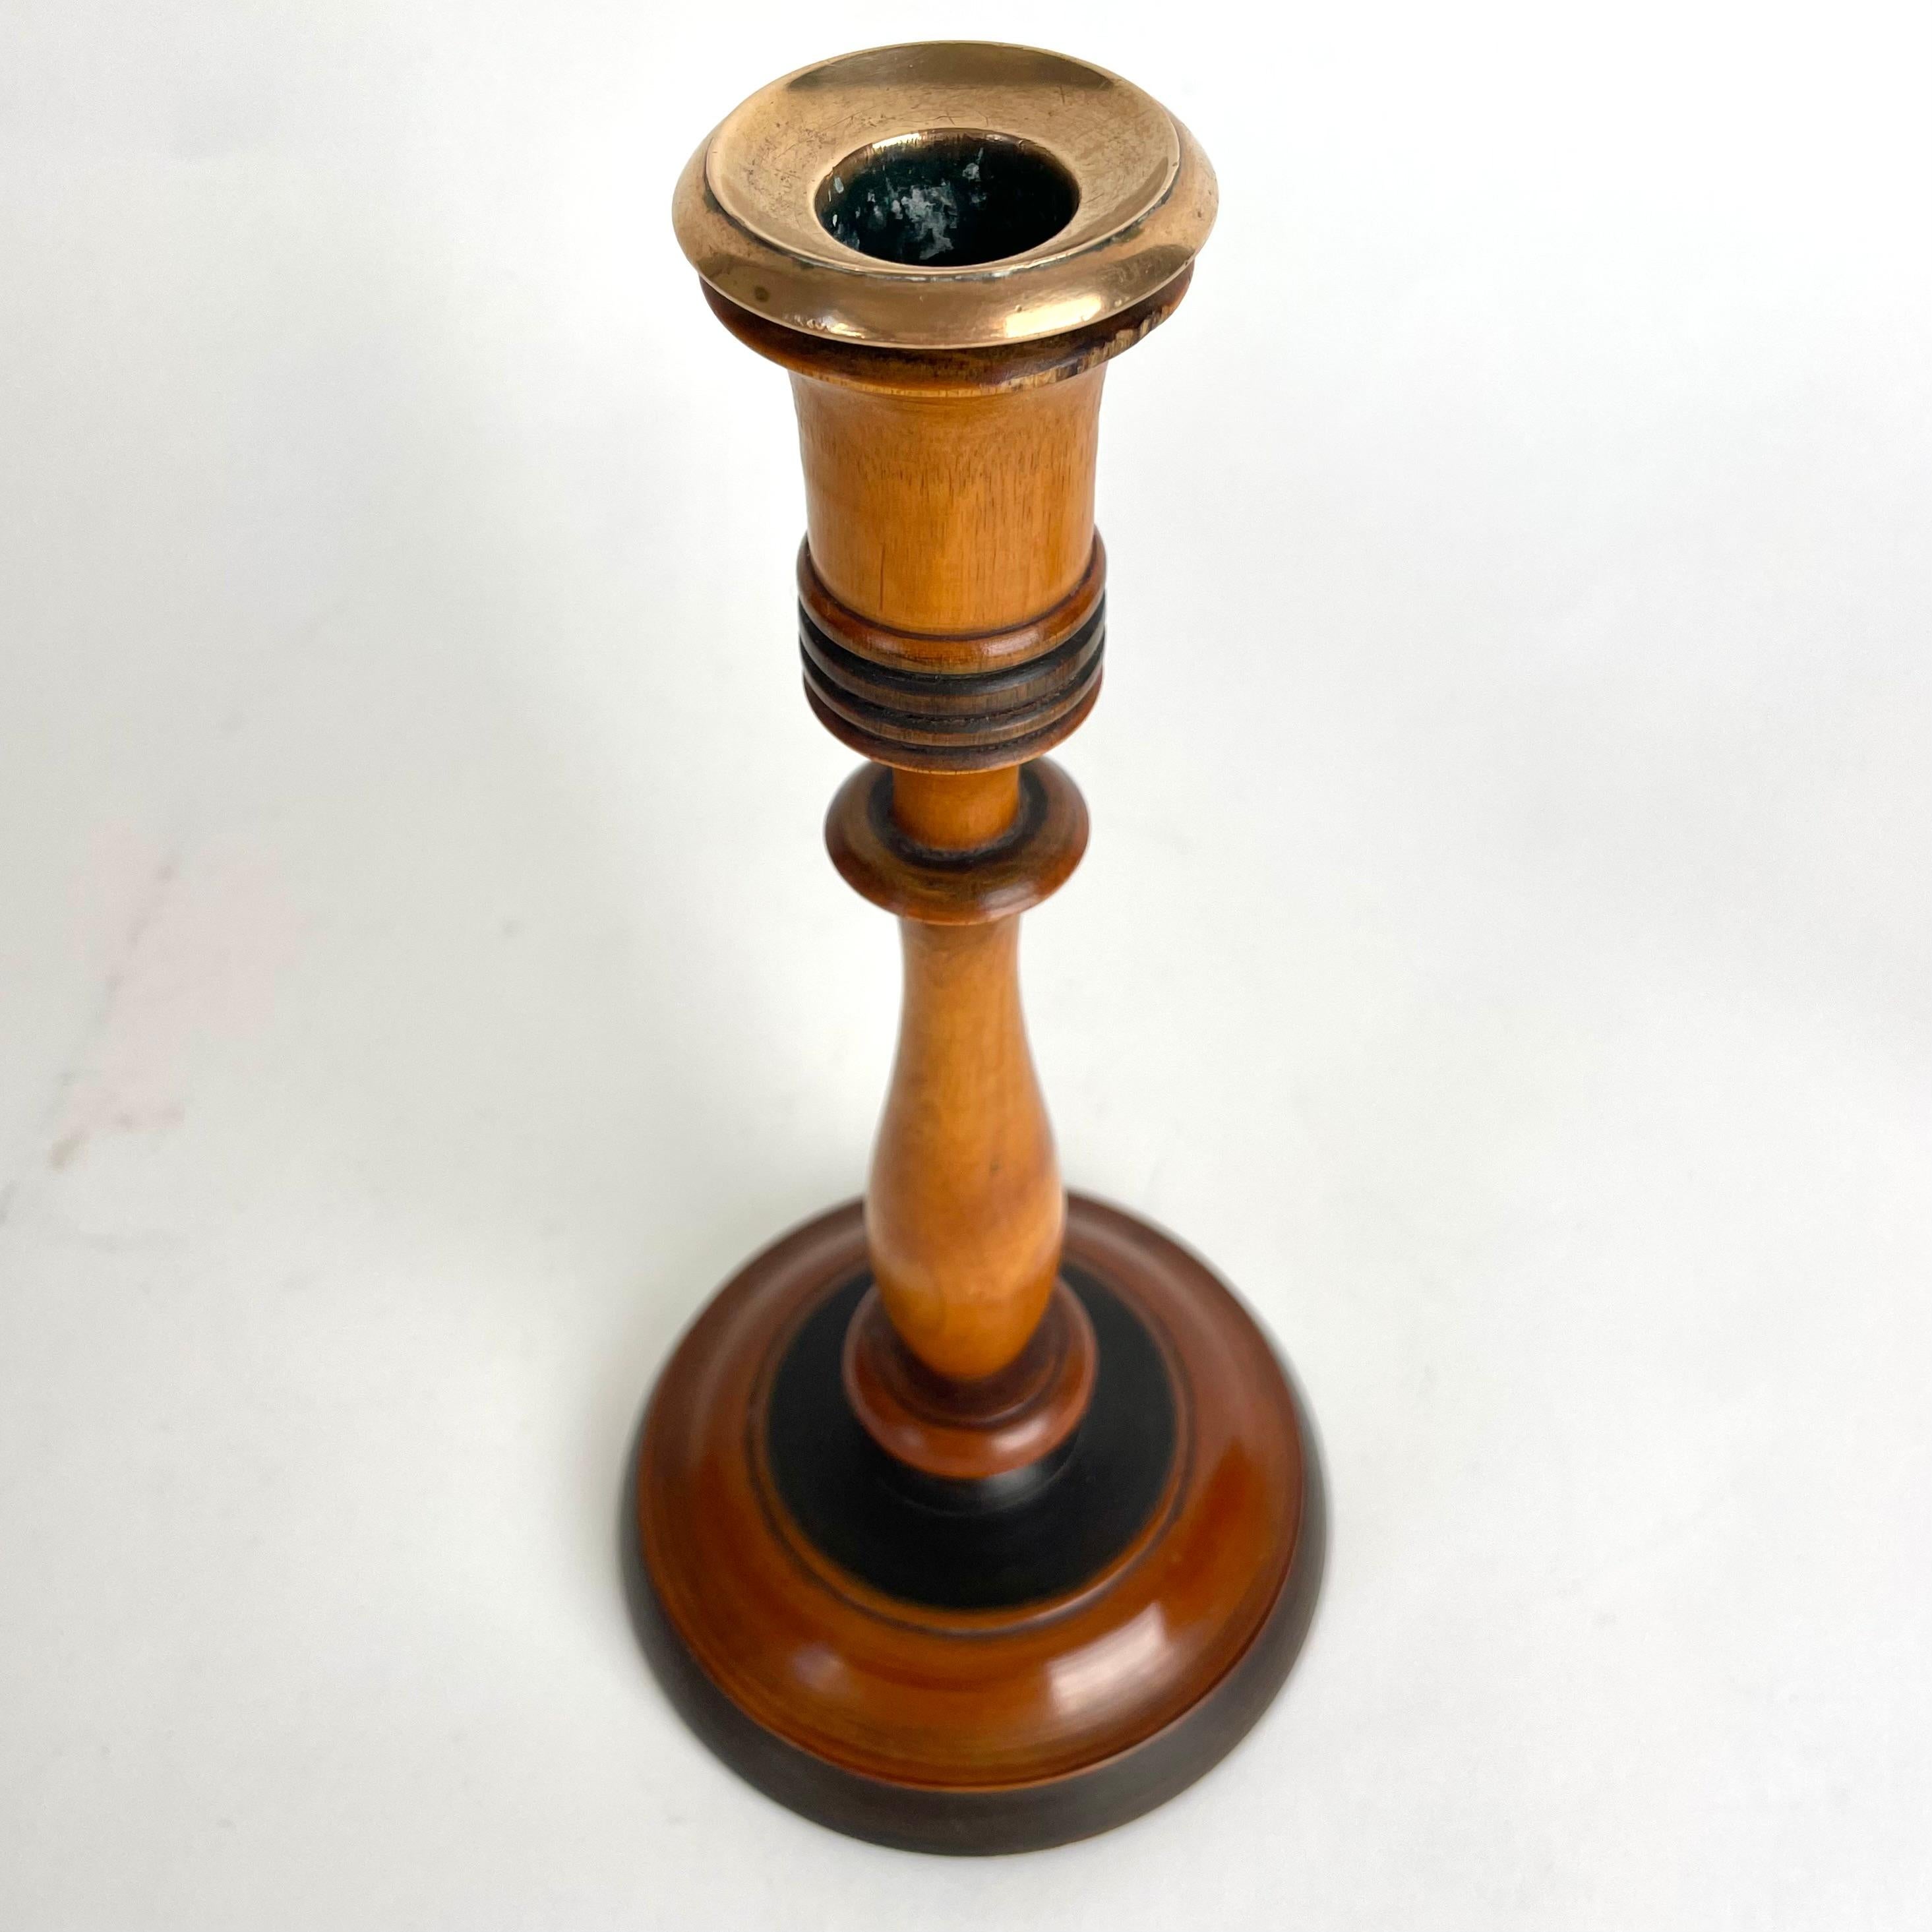 Pair of Birch Candlesticks in Swedish Karl-Johan from the 1820s-1830s For Sale 1